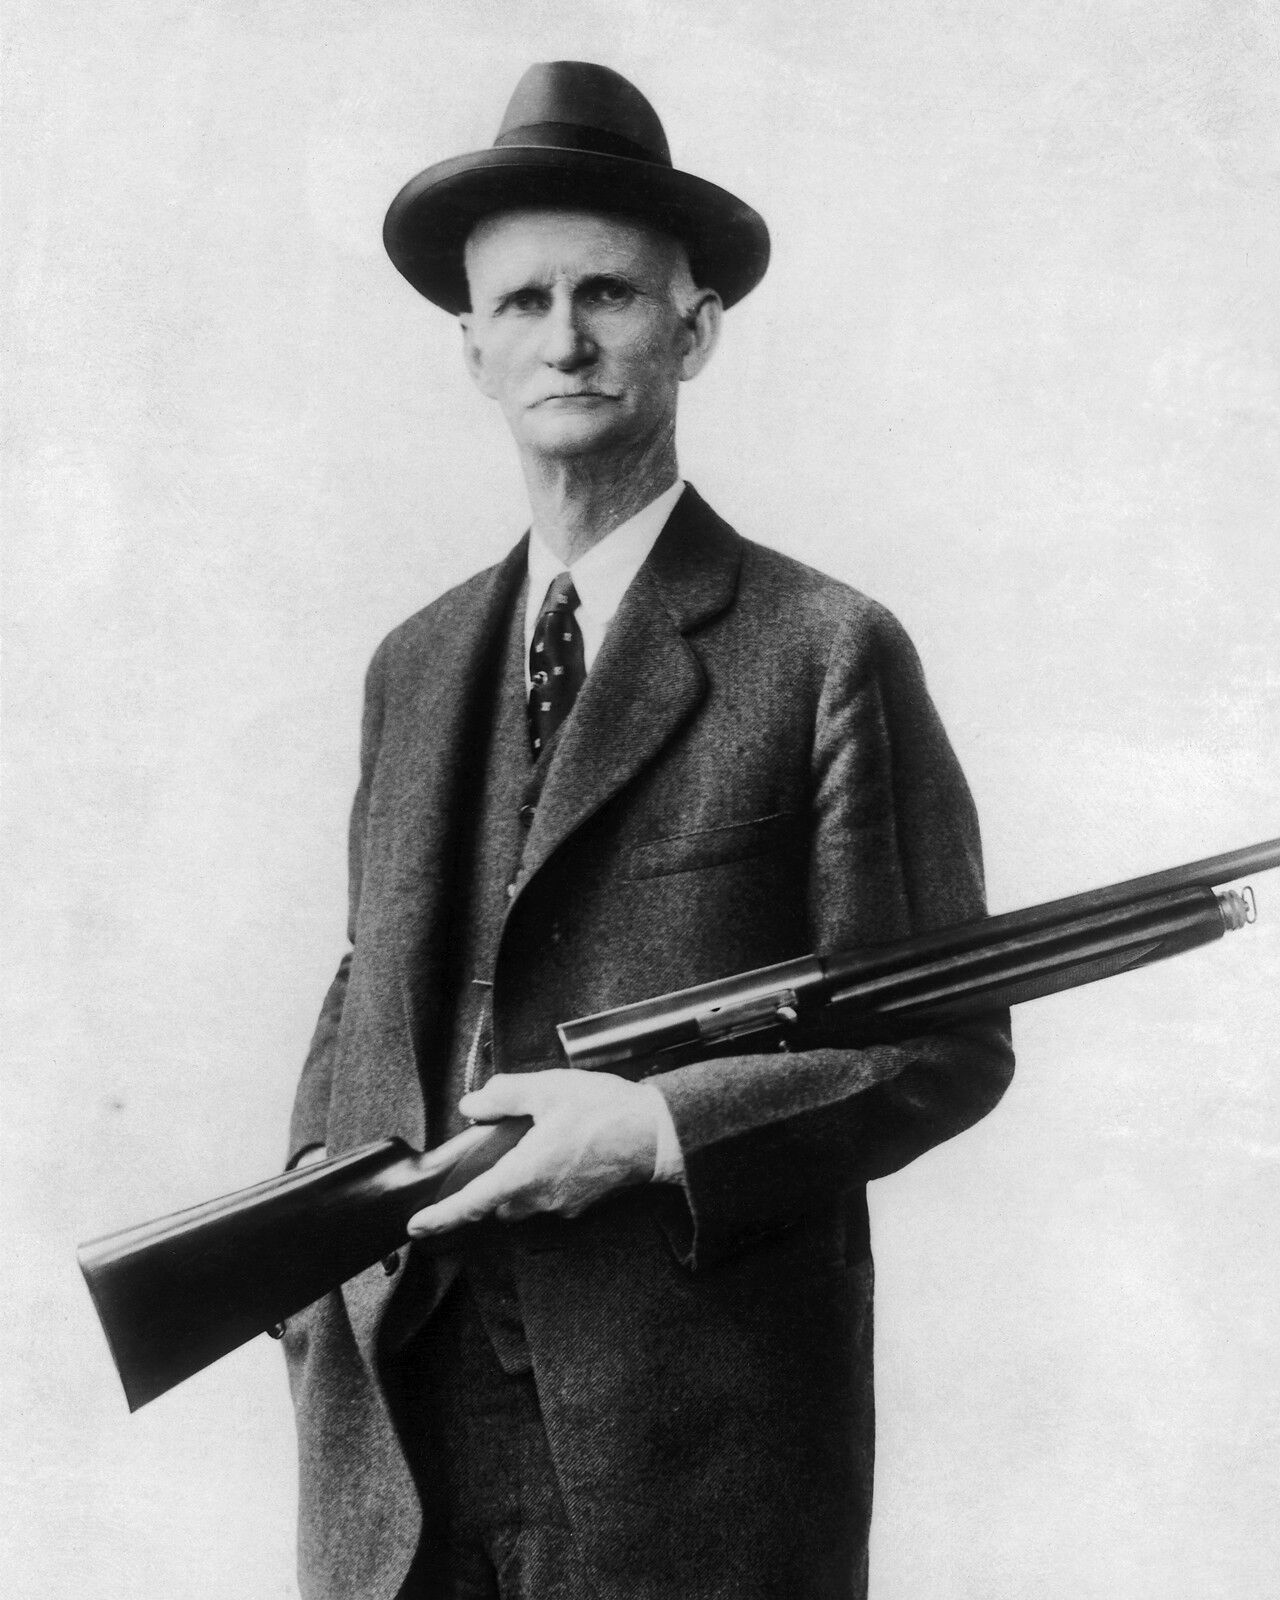 New 11x14 Photo: John Moses Browning, American Inventor and Firearms Designer